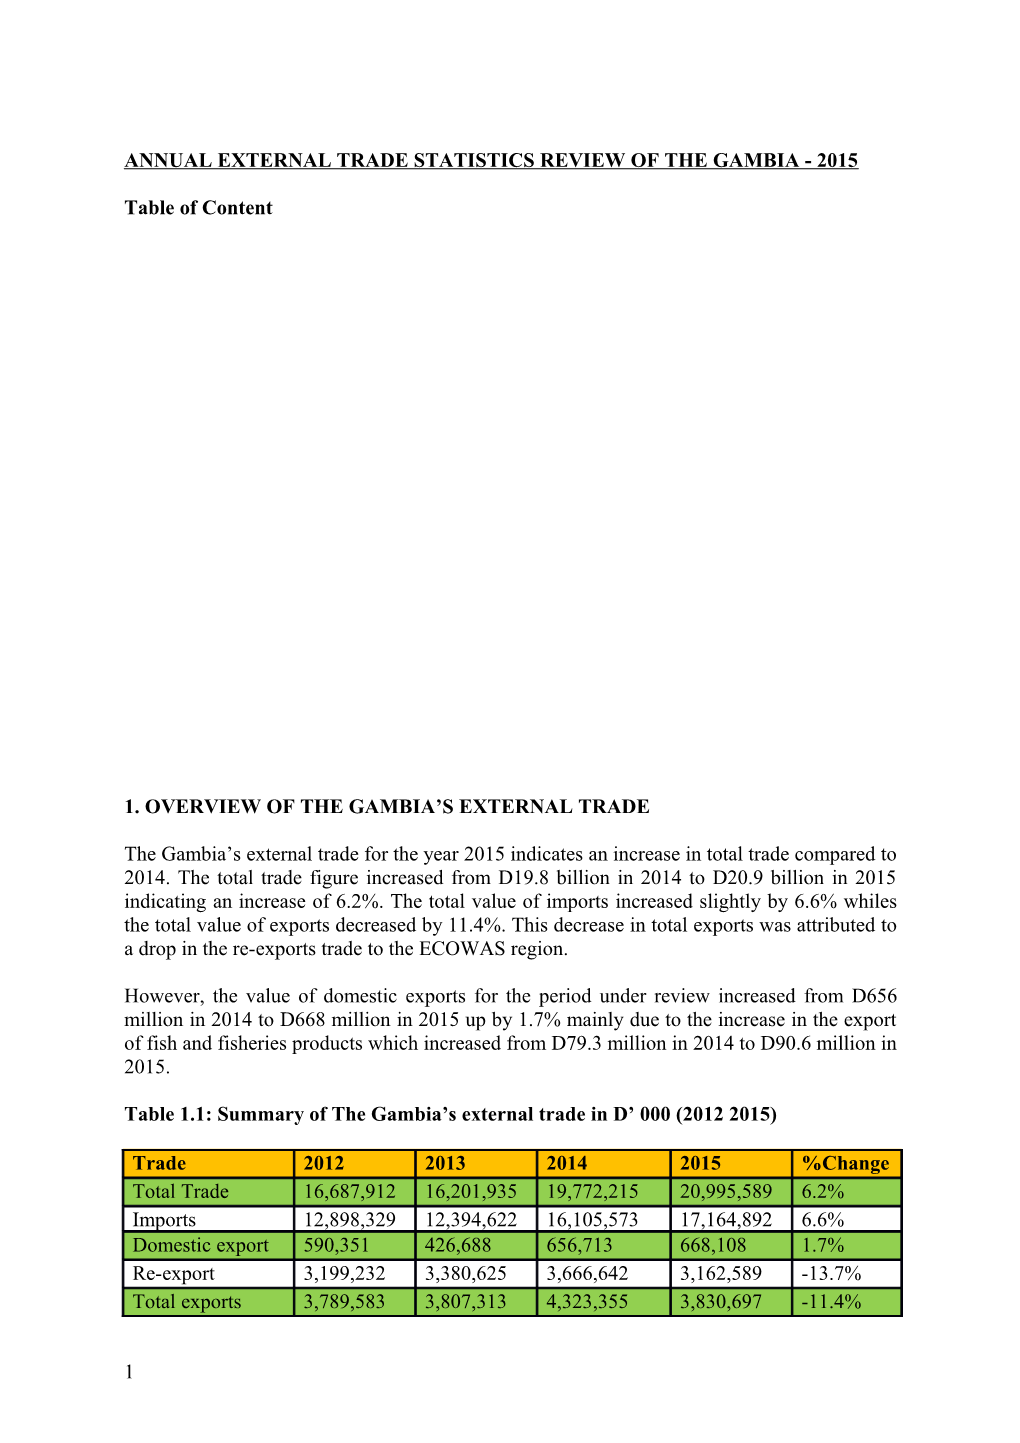 Annual External Trade Statistics Review of the Gambia - 2015